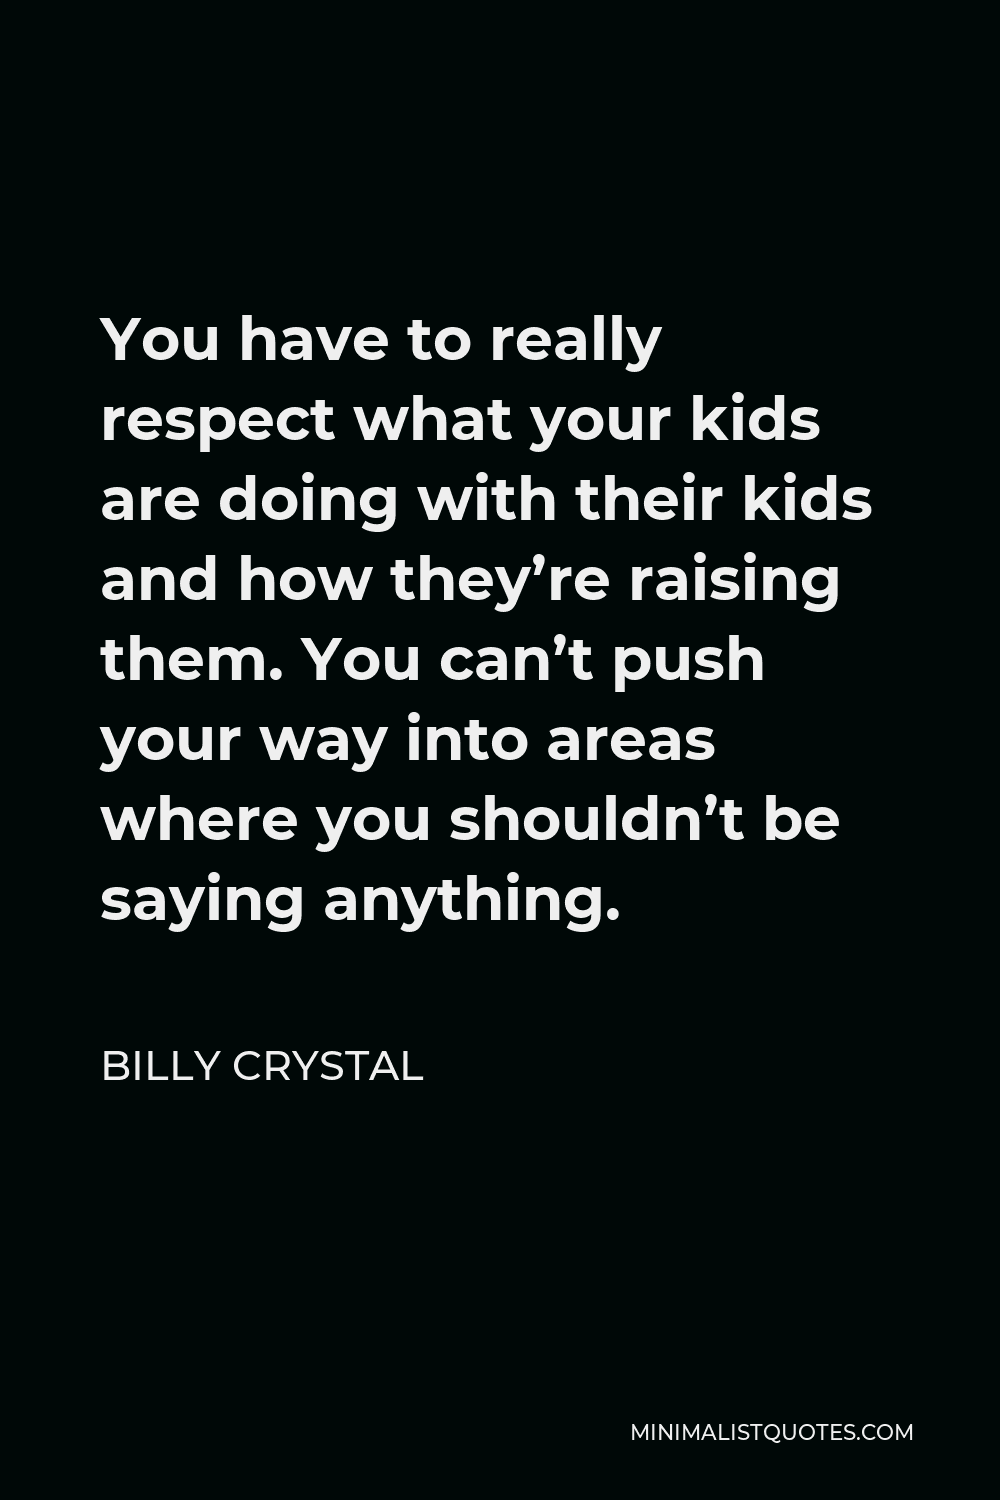 Billy Crystal Quote - You have to really respect what your kids are doing with their kids and how they’re raising them. You can’t push your way into areas where you shouldn’t be saying anything.